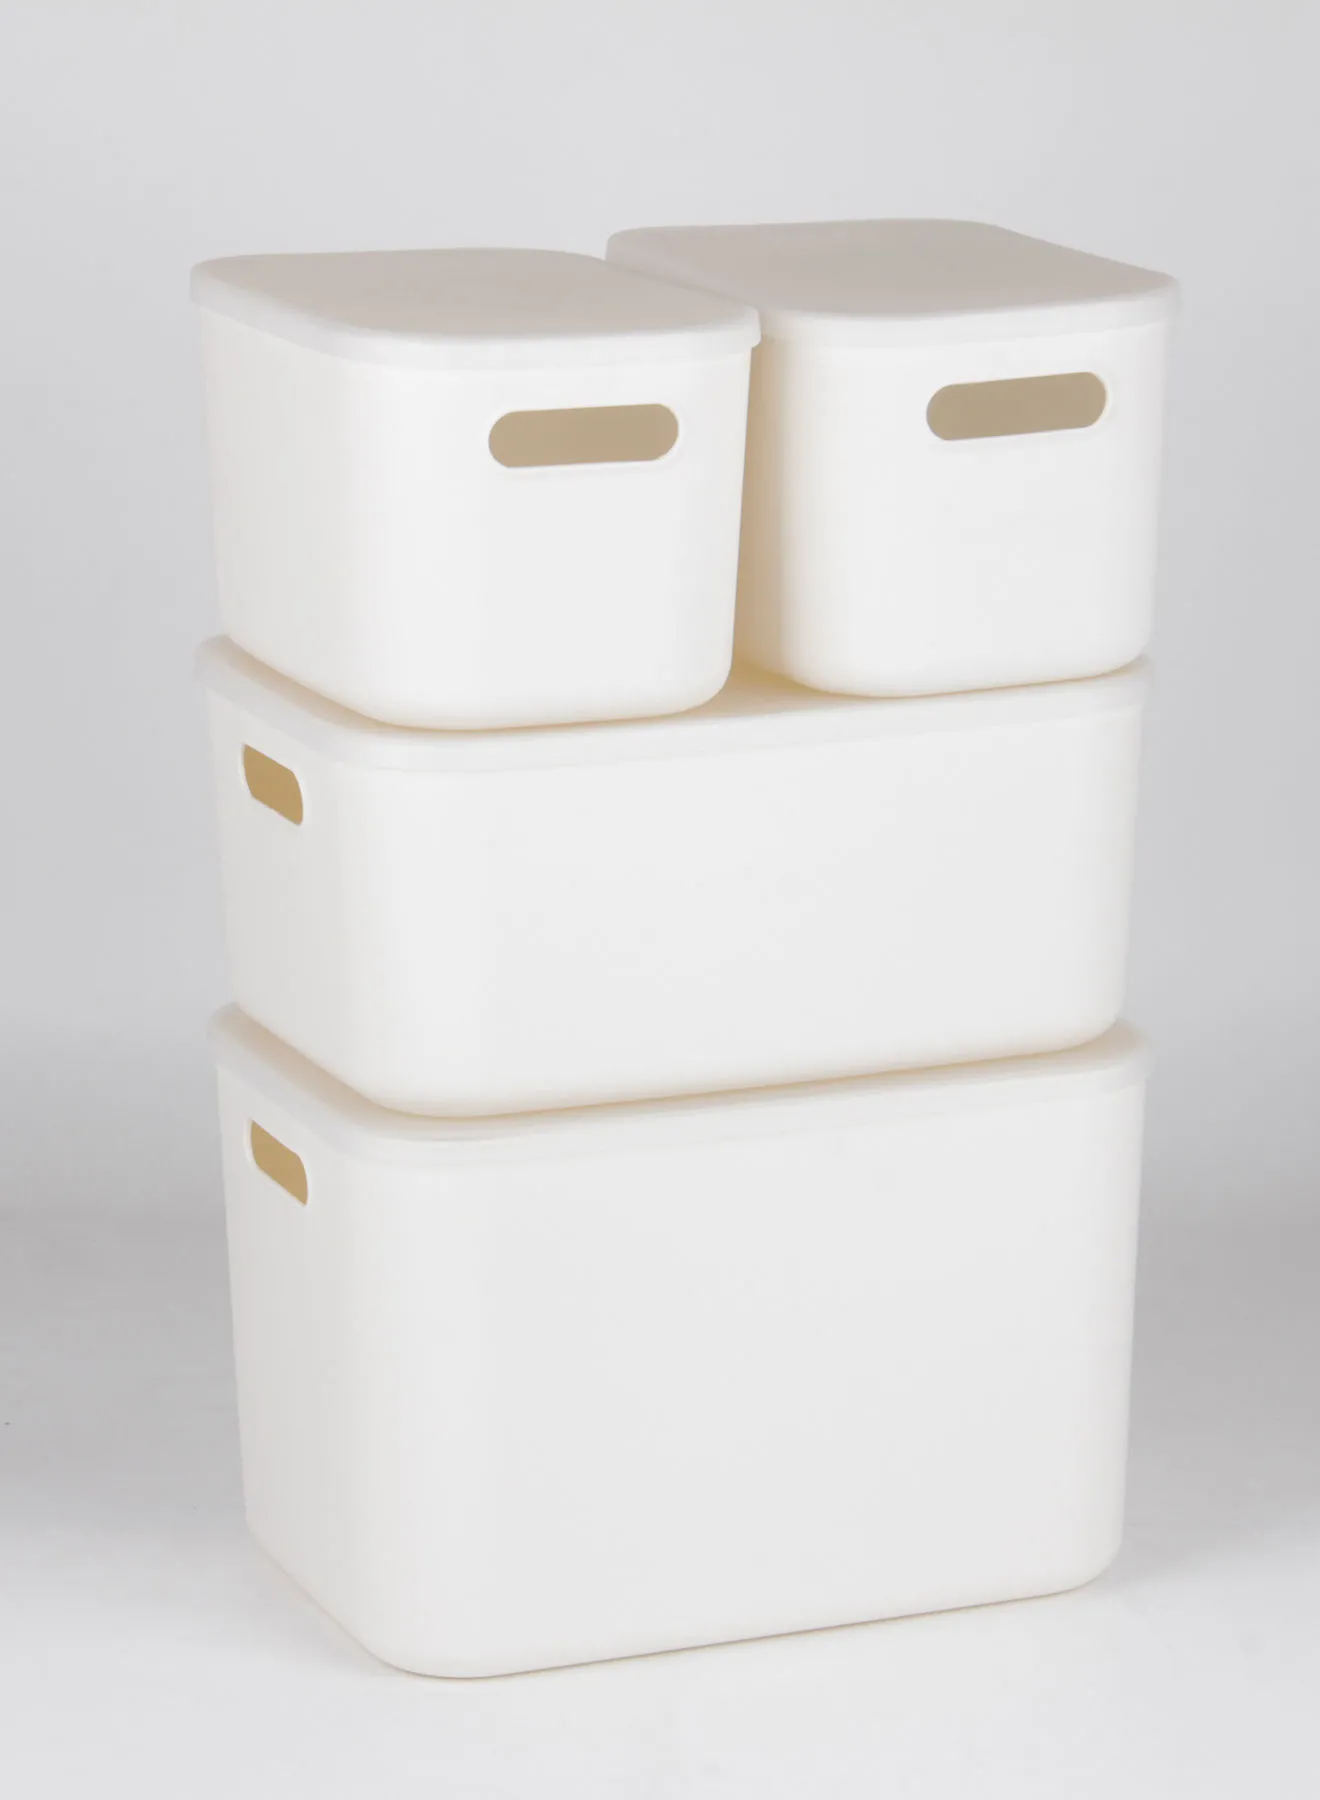 Amal 4-Piece Storage Container Set Convenient to use Daily Simple Storage Hygienic and Organized TG51291S4 White 24 x 36 x 26cm